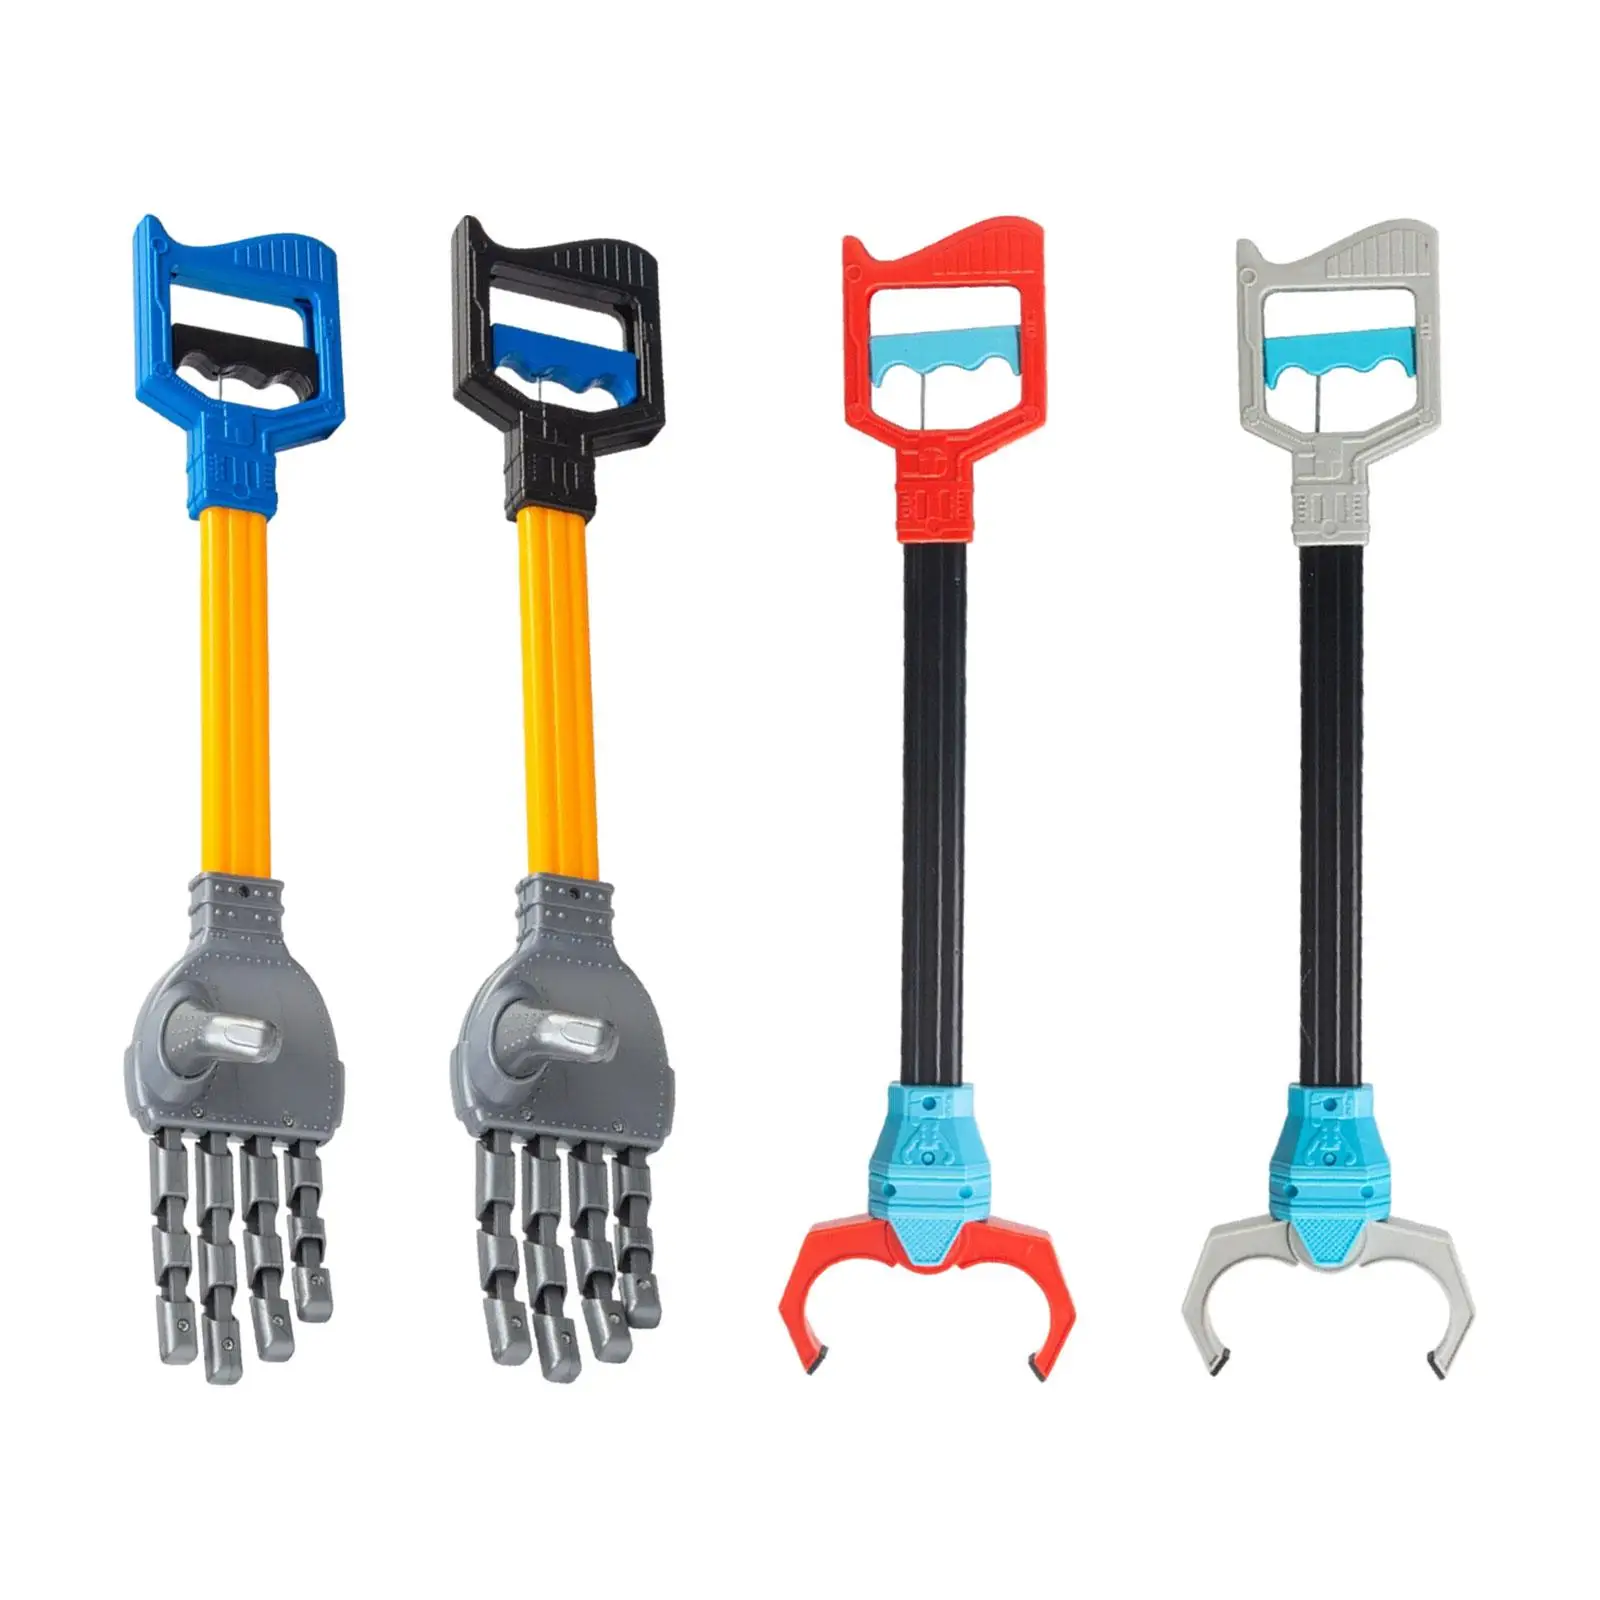 

Kids Grabbing Pick up Toy Robotic Claw Grabber Tools Litter Picker Fun Hand Eye Coordination Play Toys